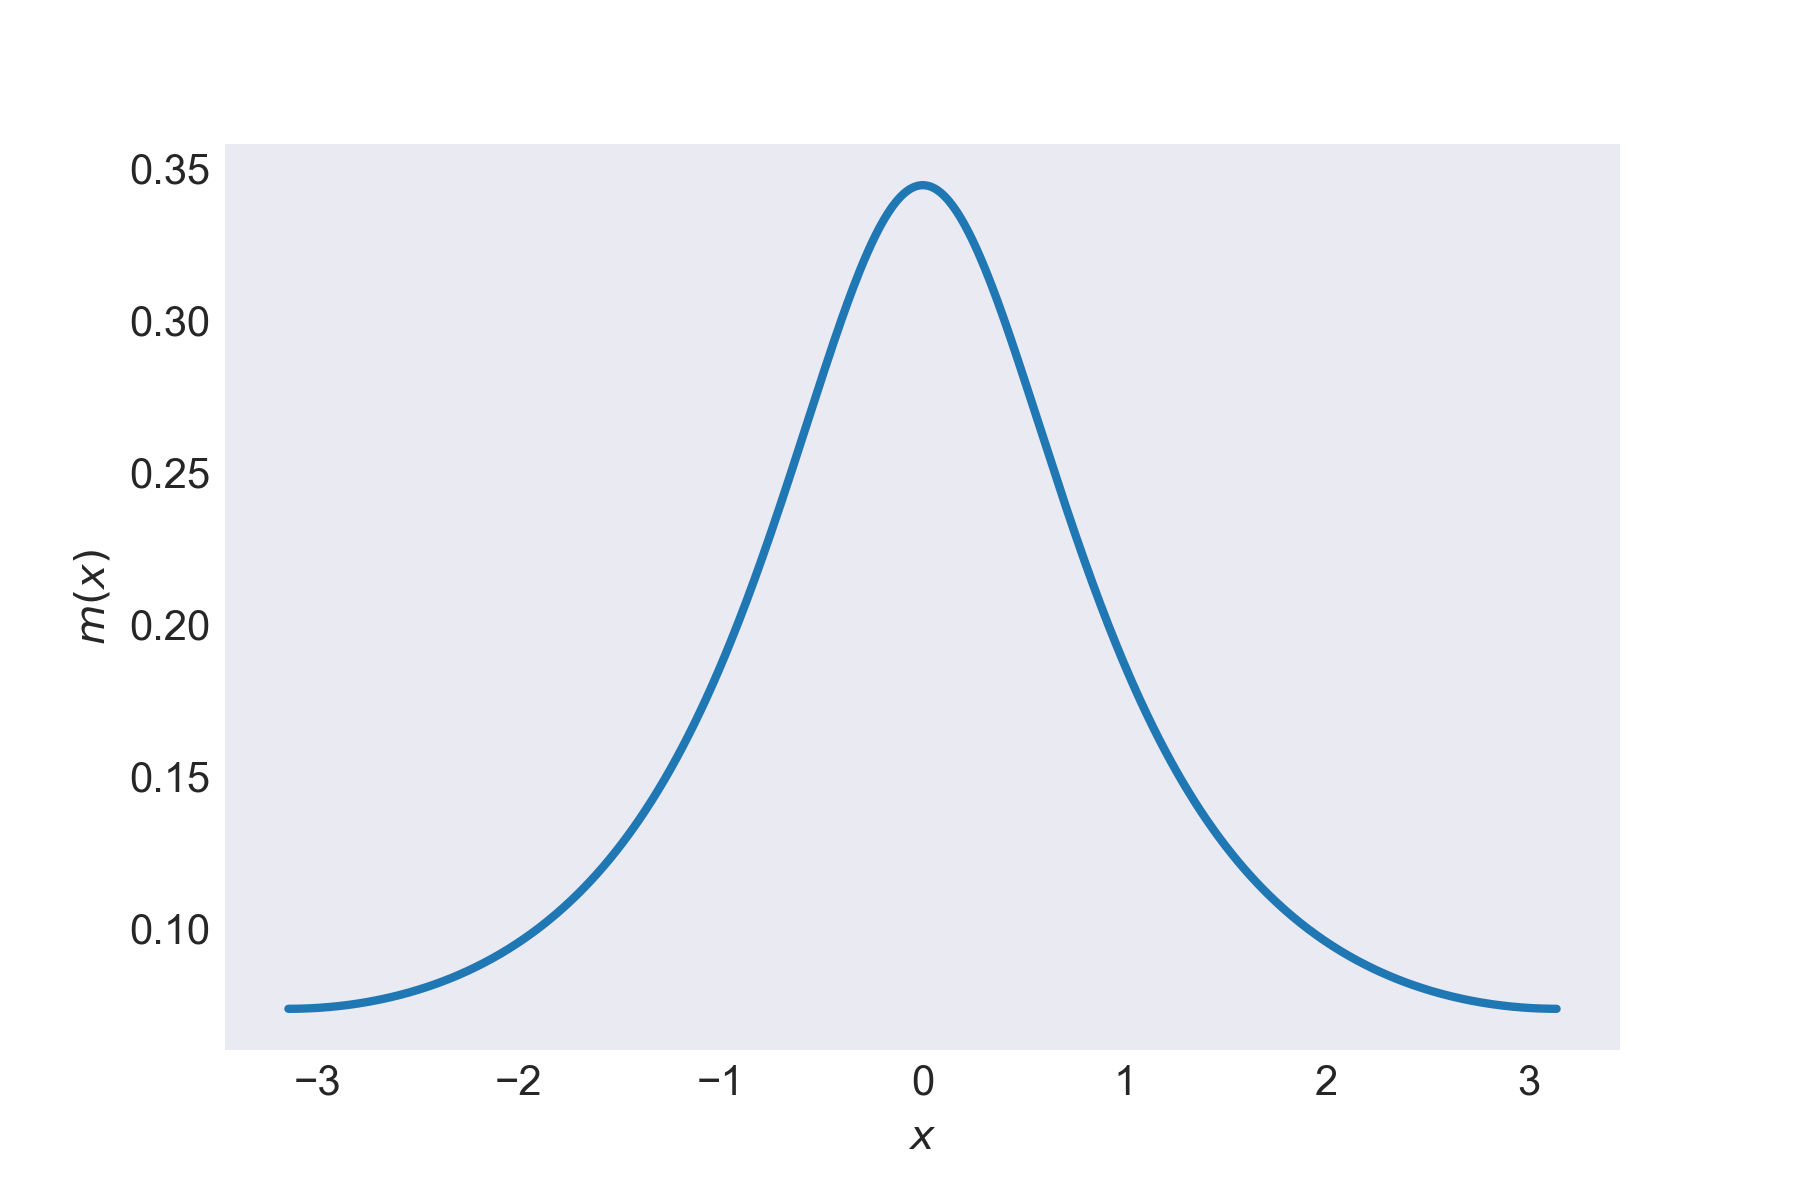 The wrapped Cauchy distribution